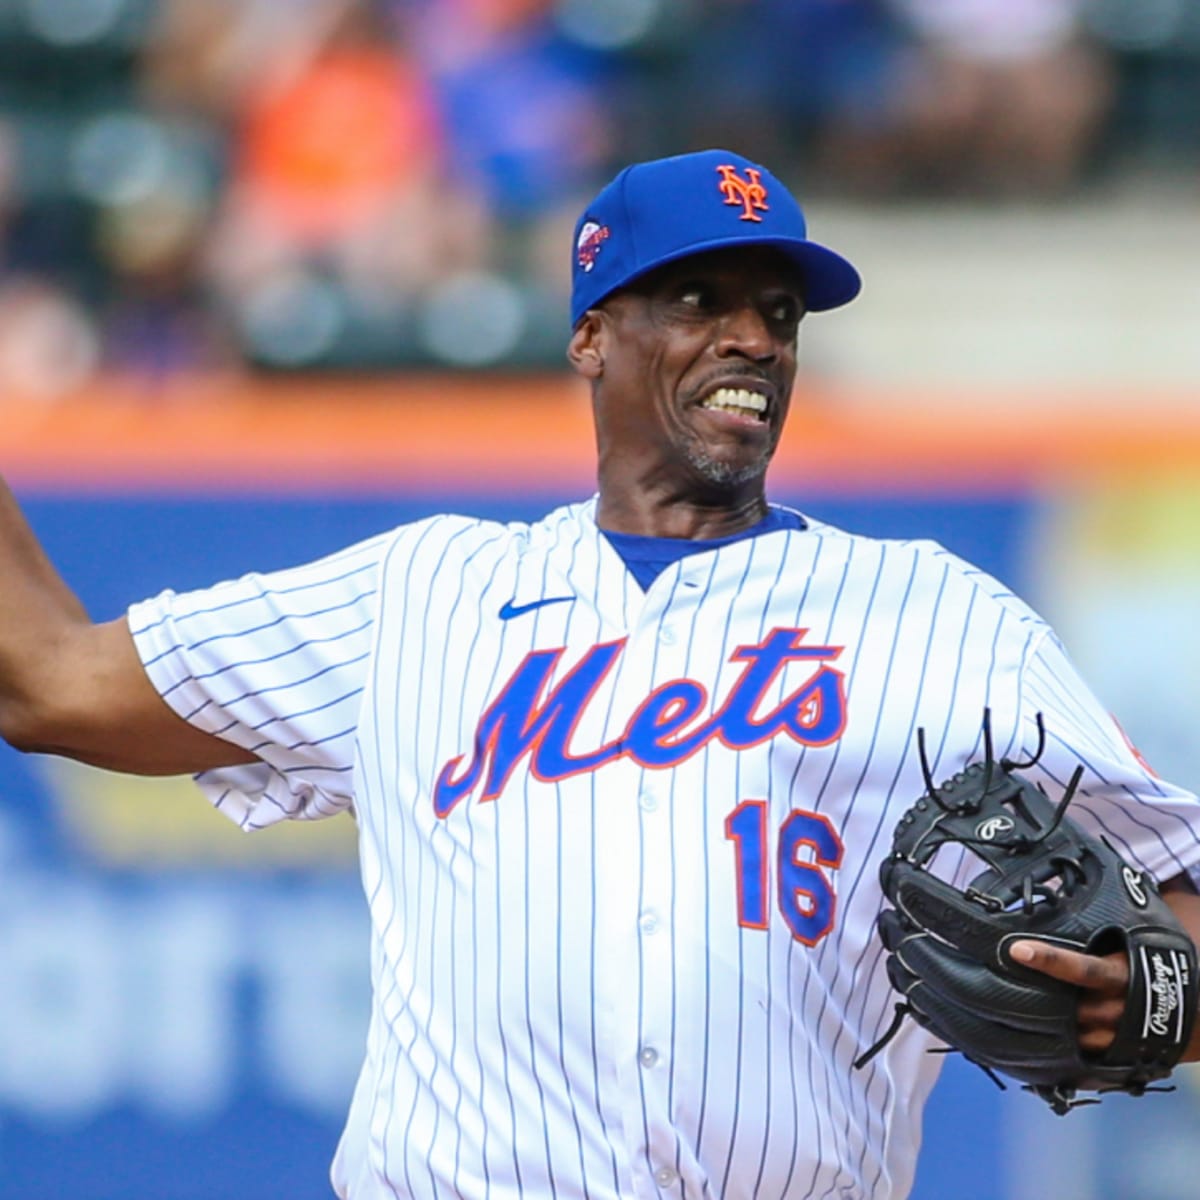 An exclusive interview with Dwight Gooden on his number being retired by  the Mets